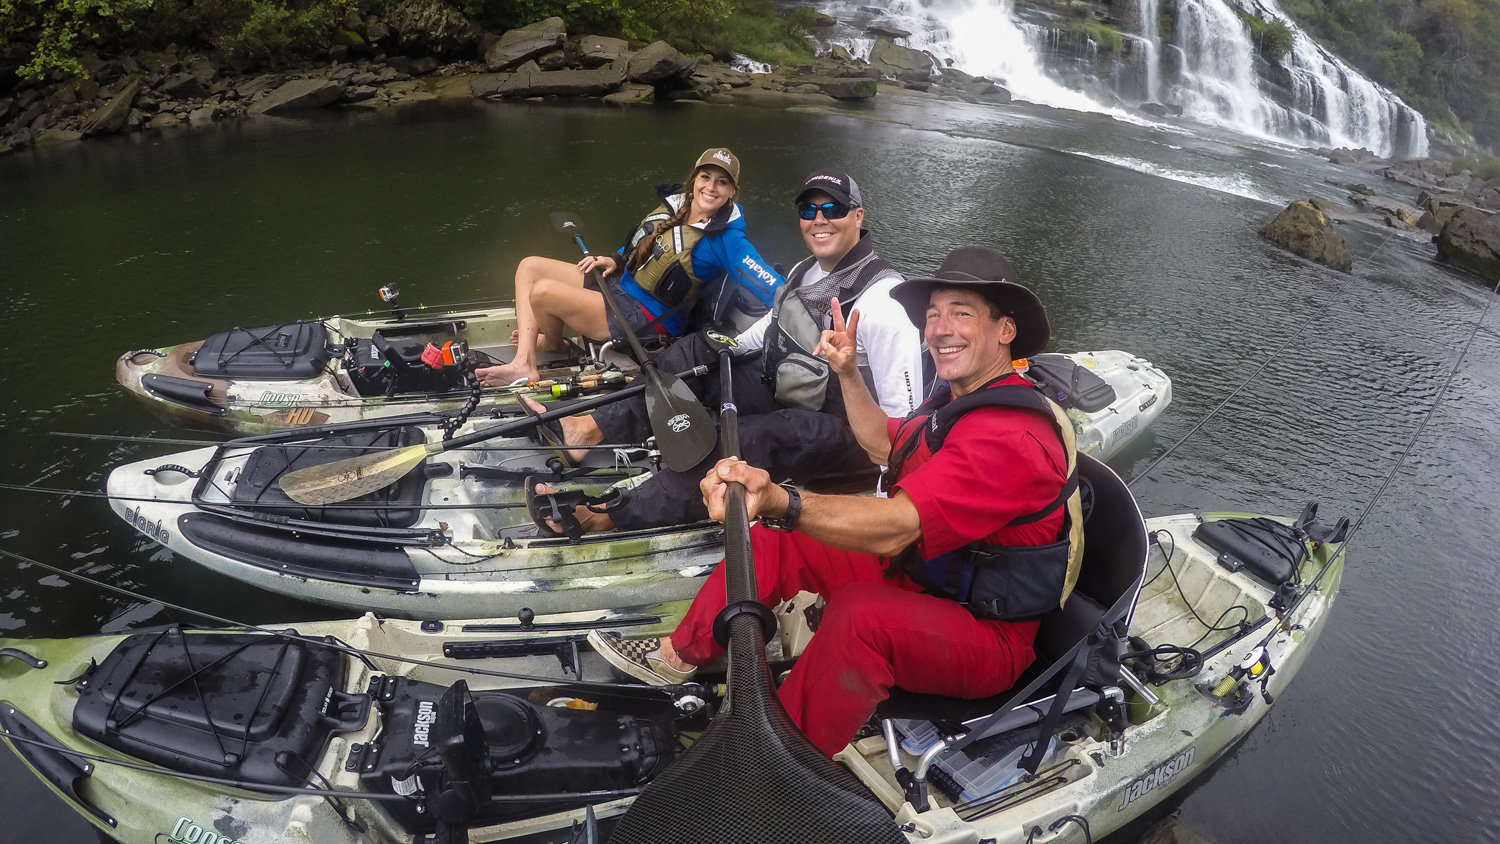 FLW and KBF Announce Initial Sponsors for Kayak Fishing Events